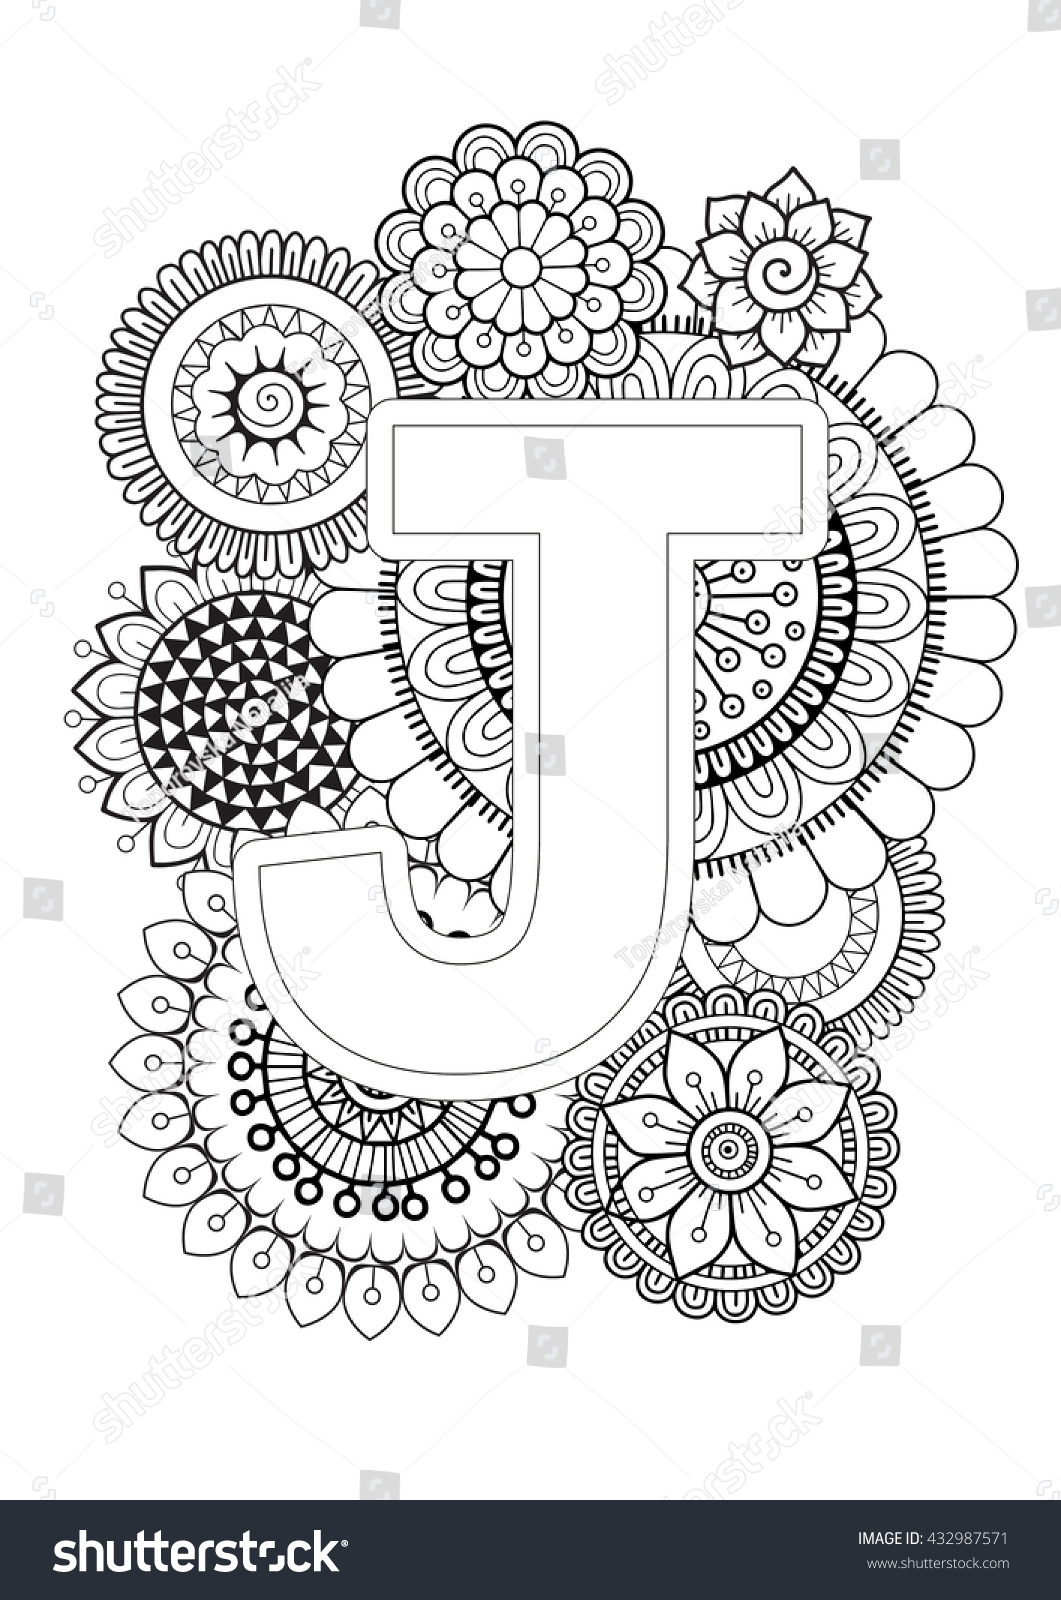 Doodle Floral Letters Coloring Book Adult Stock Vector ...